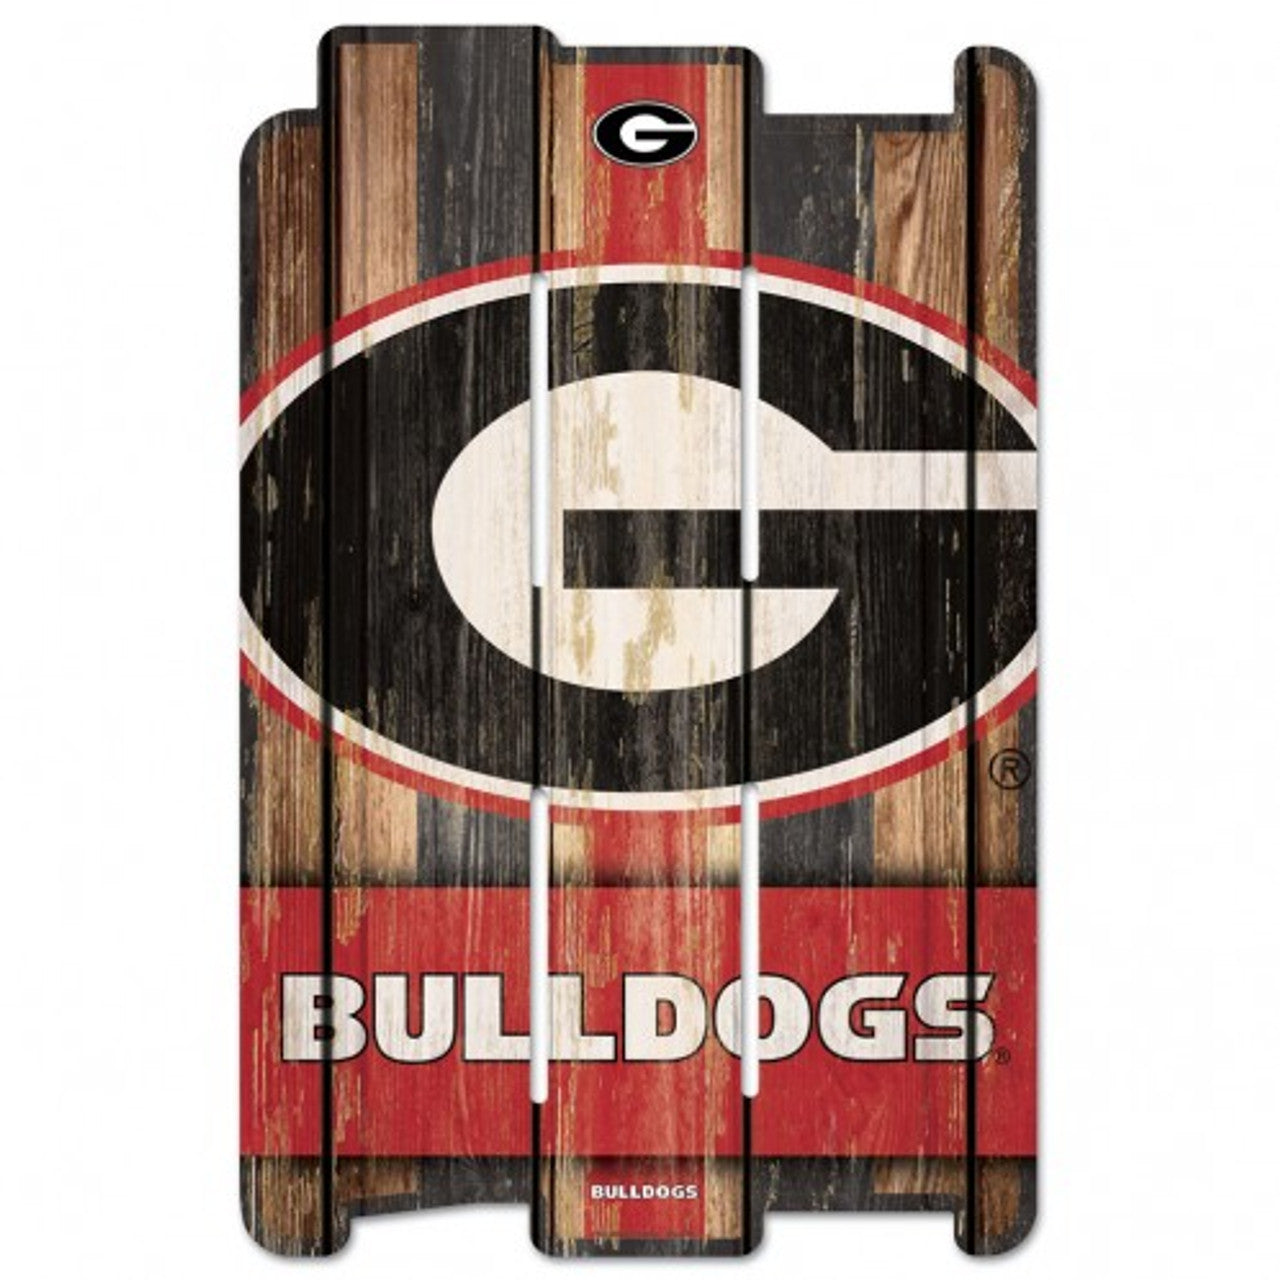 Georgia Bulldogs 11" x 17" Wood Fence Sign by Wincraft